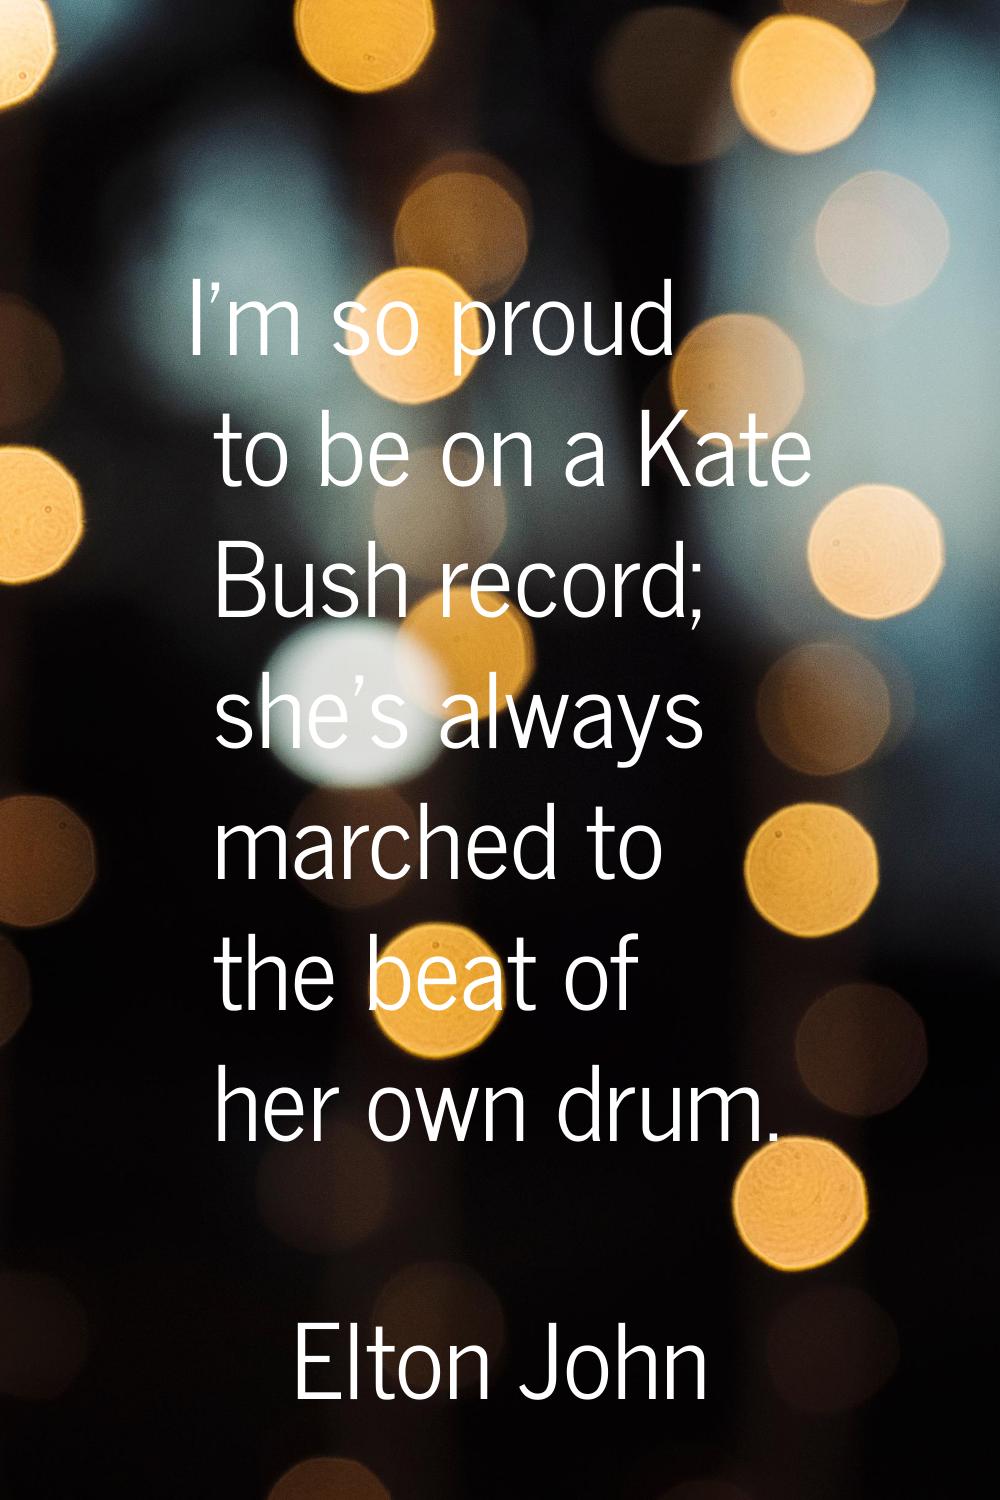 I'm so proud to be on a Kate Bush record; she's always marched to the beat of her own drum.